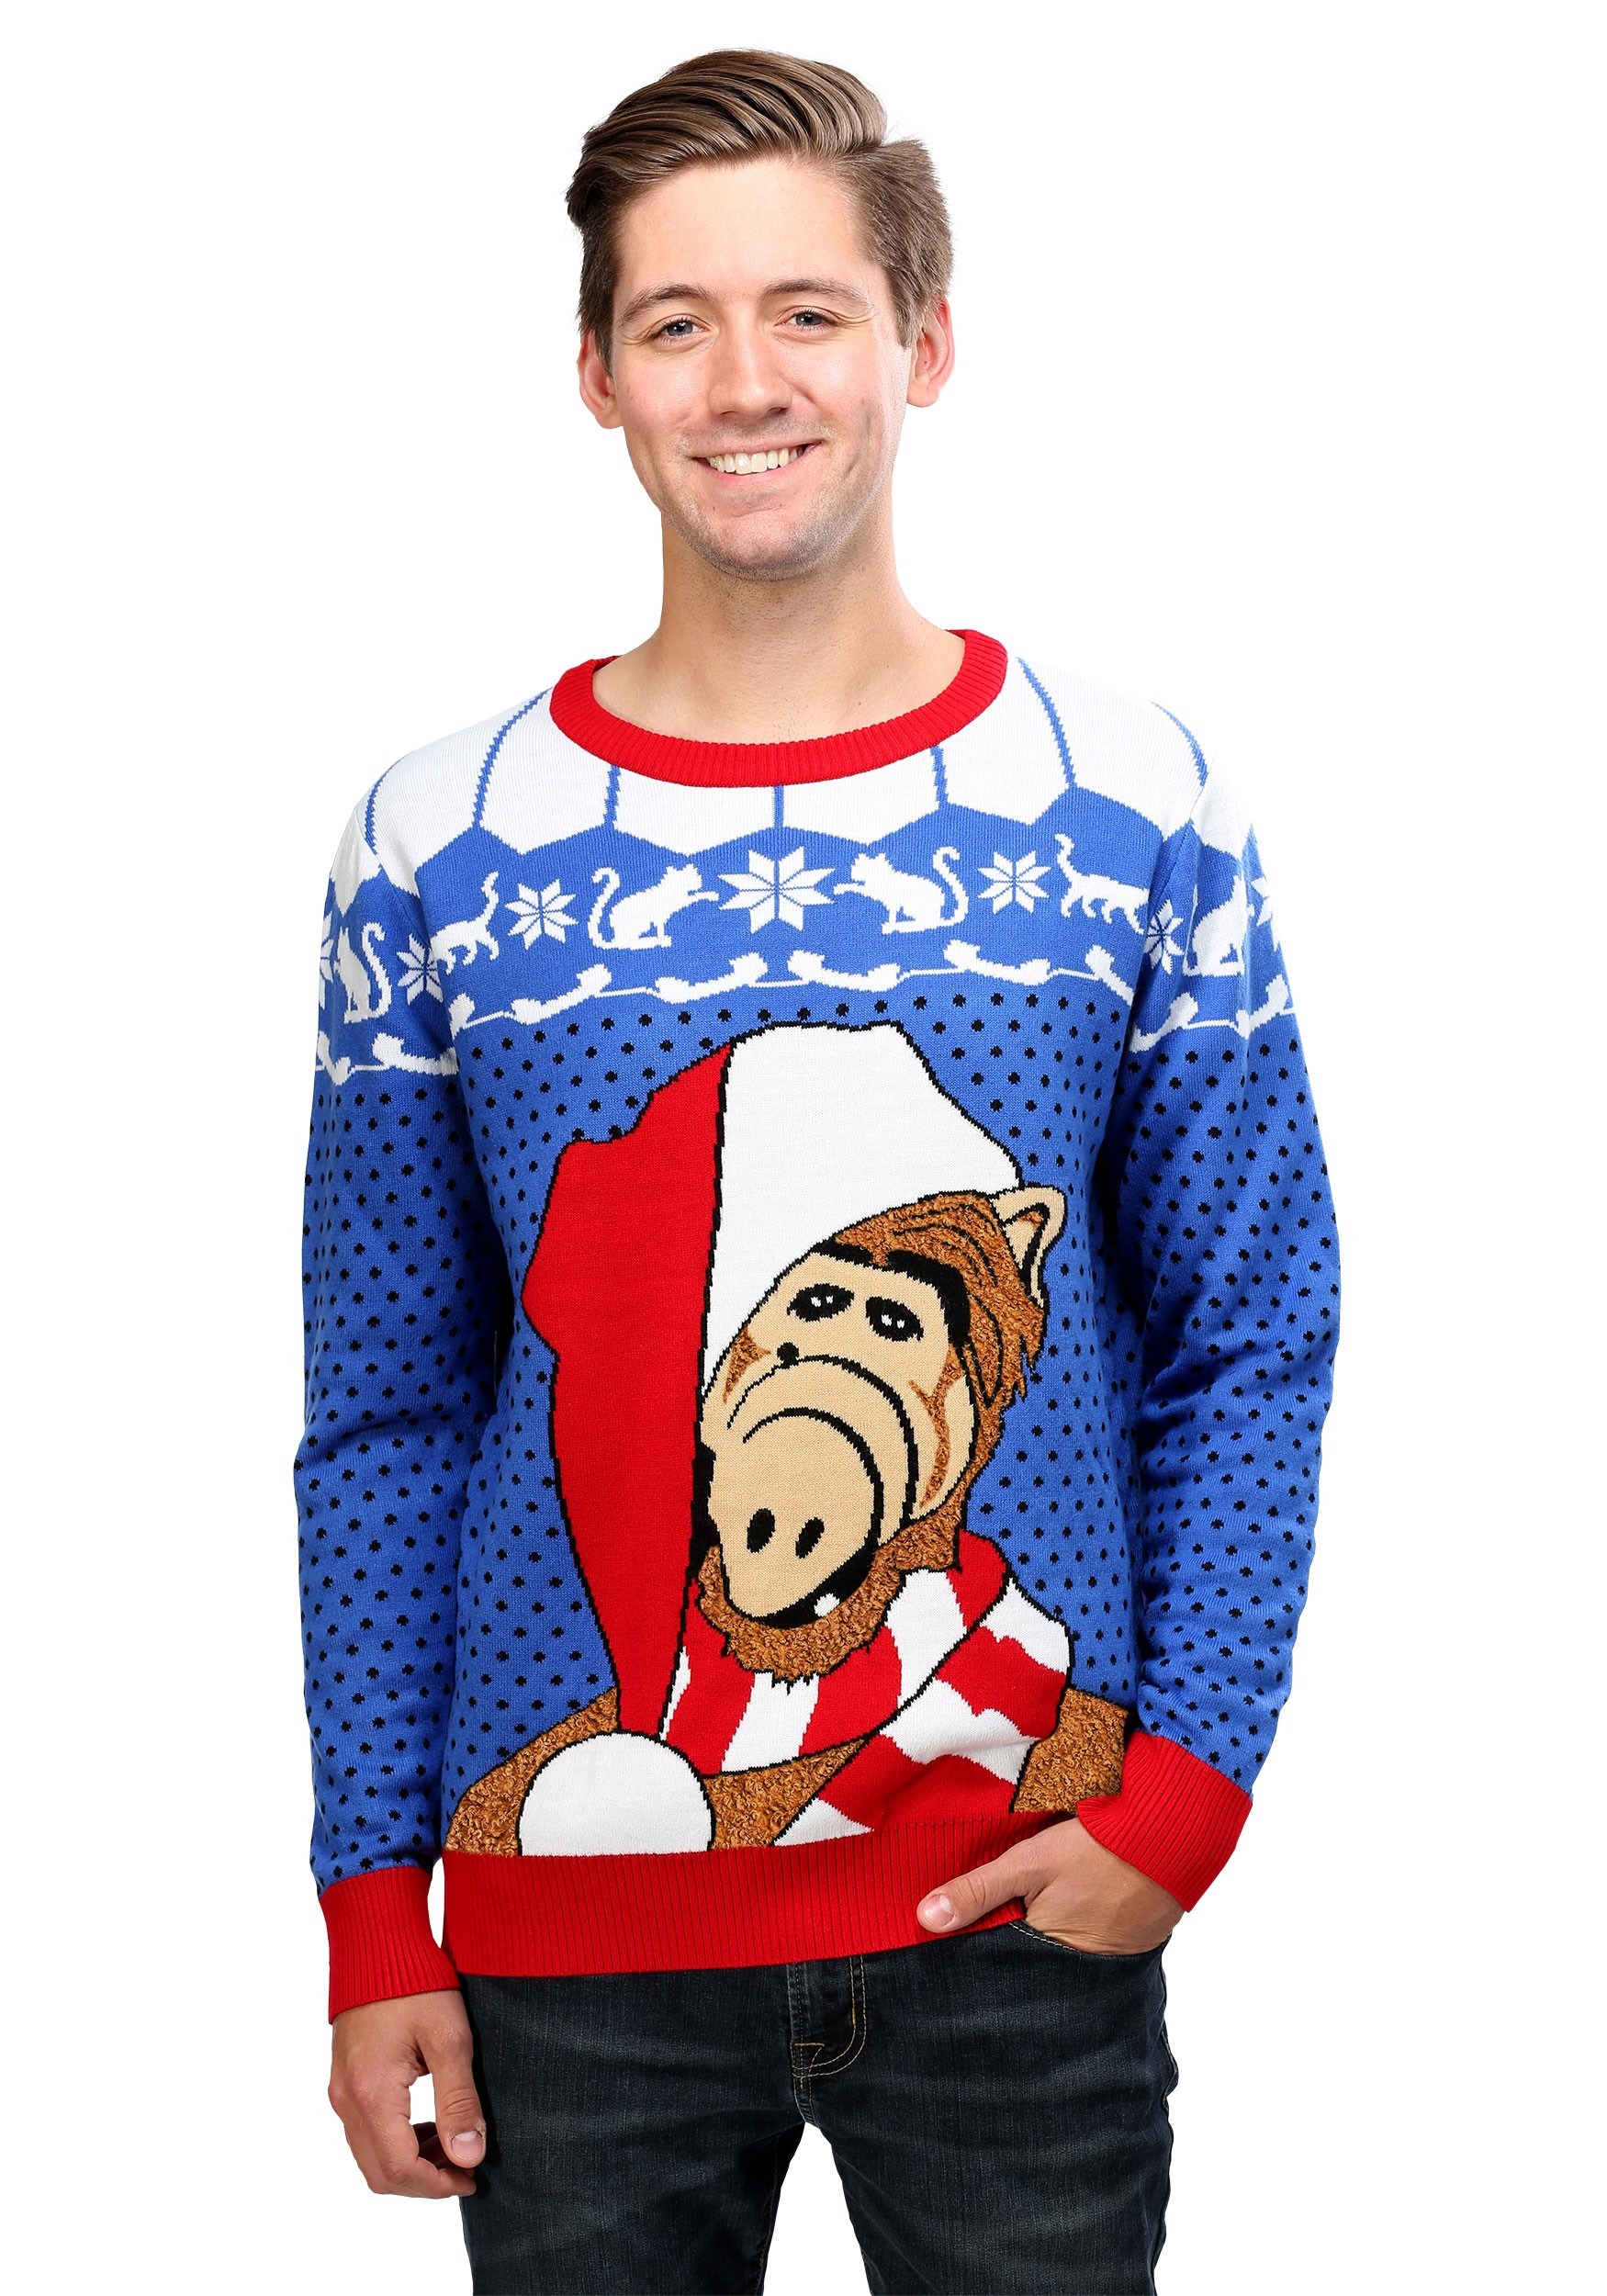 Adult Alf Ugly Christmas Sweater , Christmas Sweaters